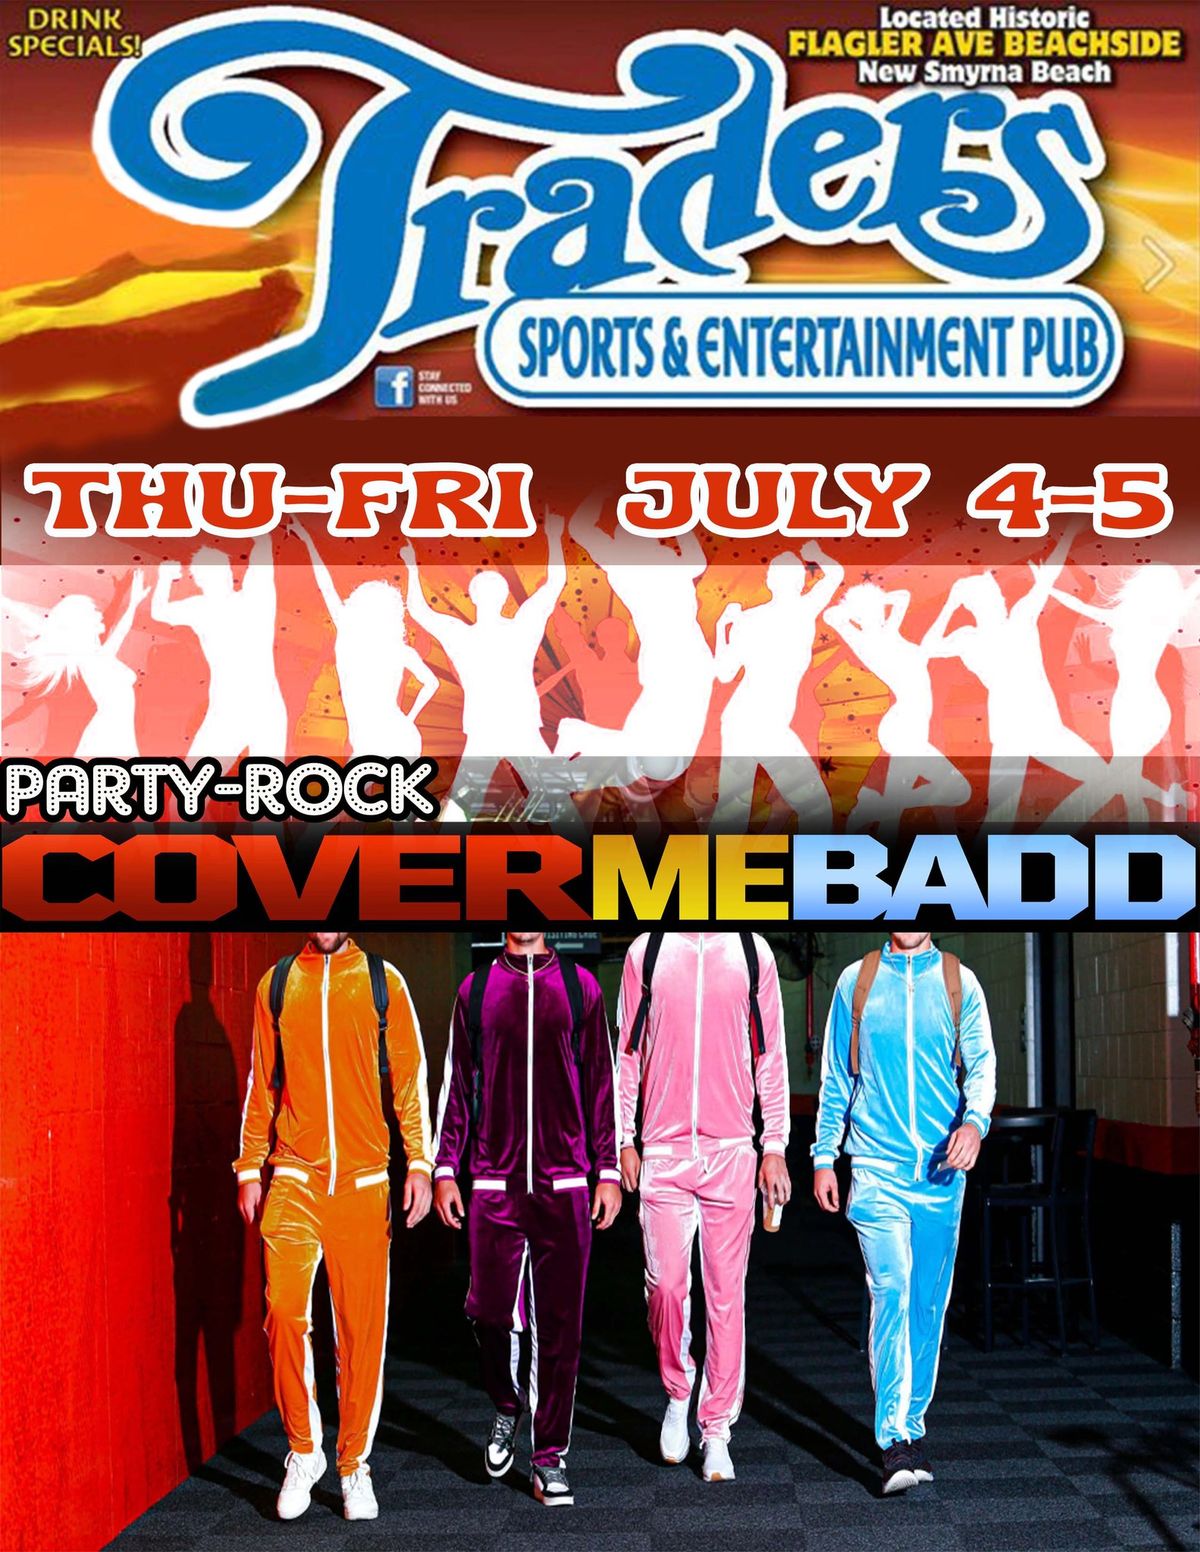 COVER ME BADD Live @ Trader's